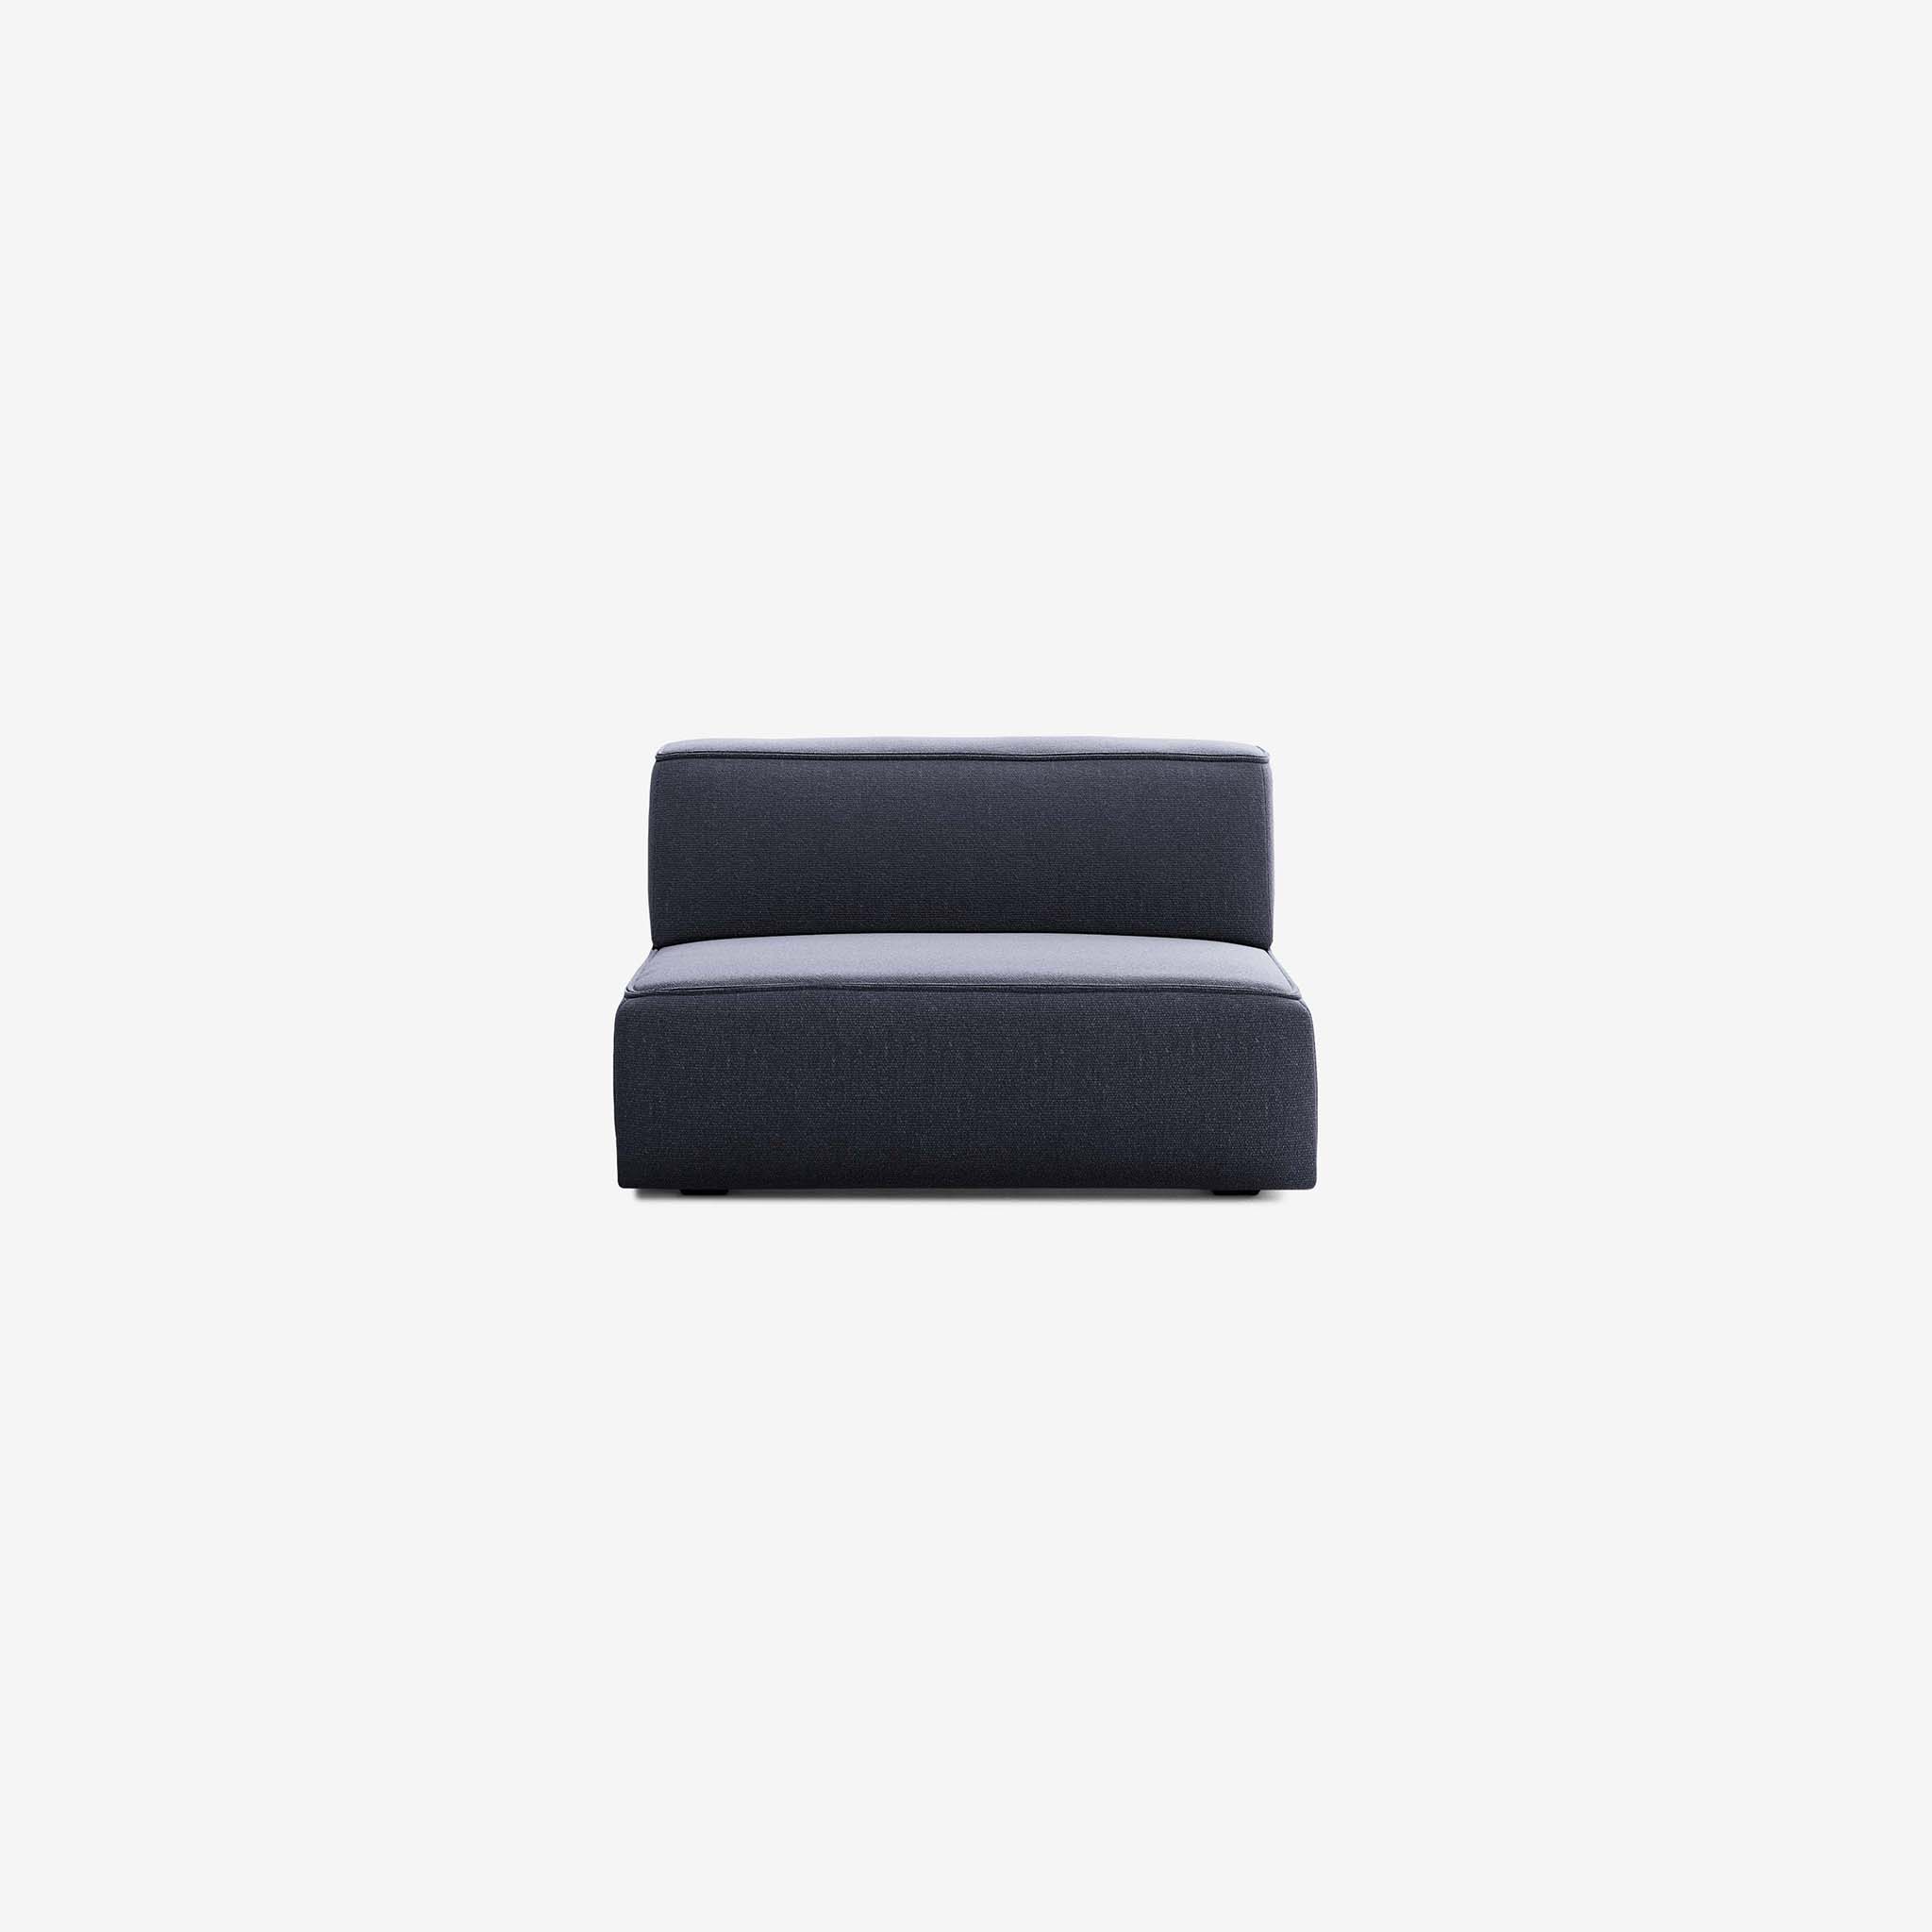 Meester Sofa 2 Seater